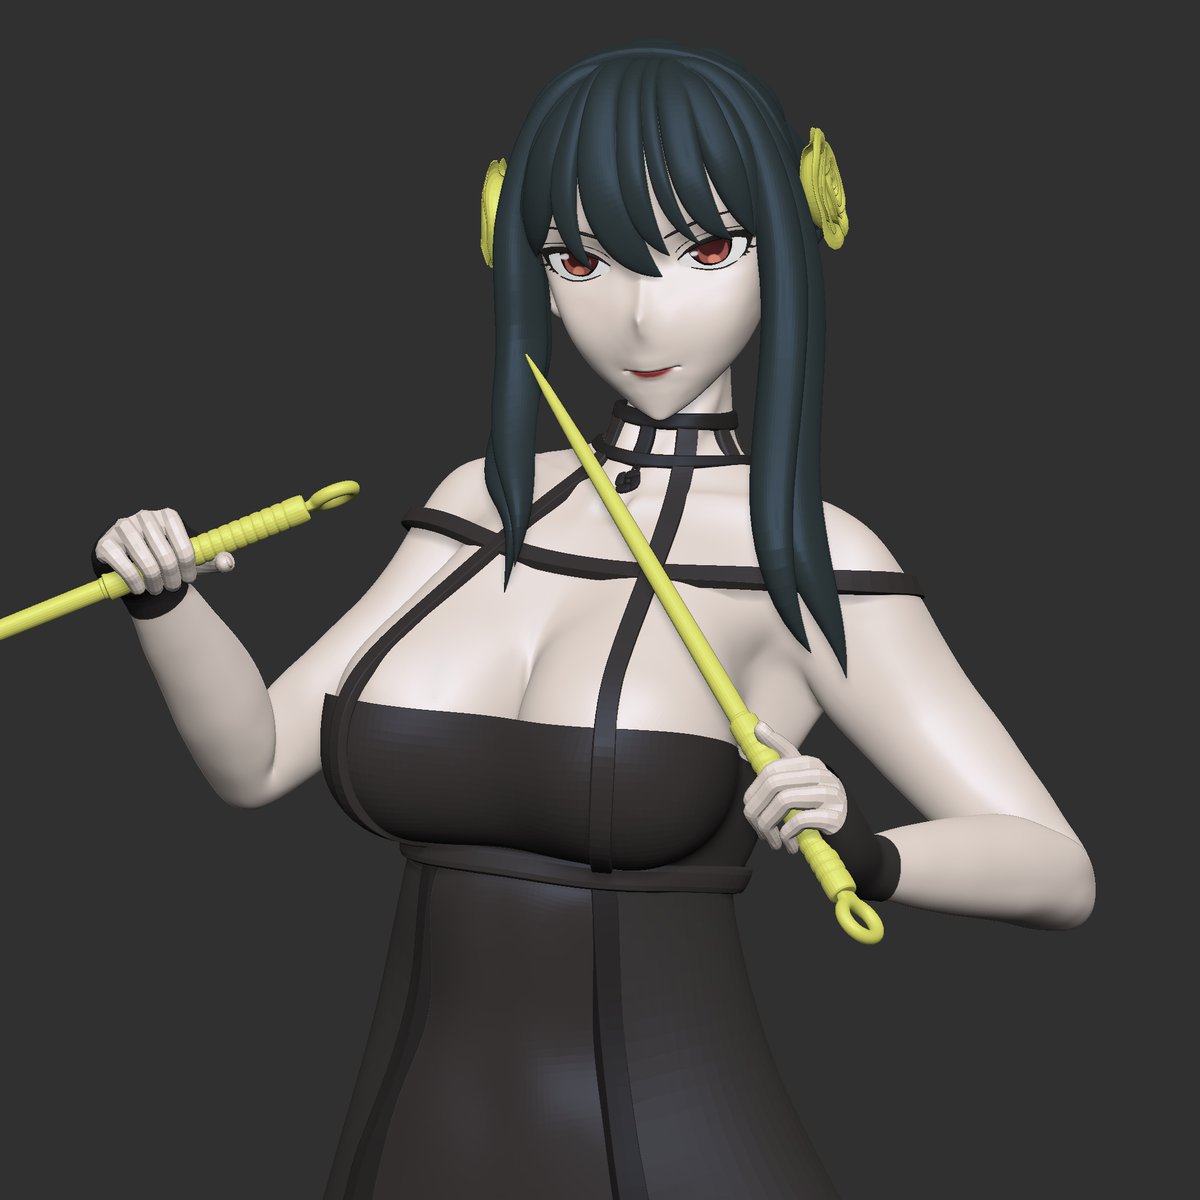 Very early WIP of Yor Forger from Spy x Family.

#yorforger #spyxfamily #blender #zbrush #characters #3d #CGI #render #art #Girls #anime #fanart #waifu #sculpting #modeling #animecharacter #zbrushsculpt #CharacterDesign #DigitalSculpting #3DPrintedFigurine